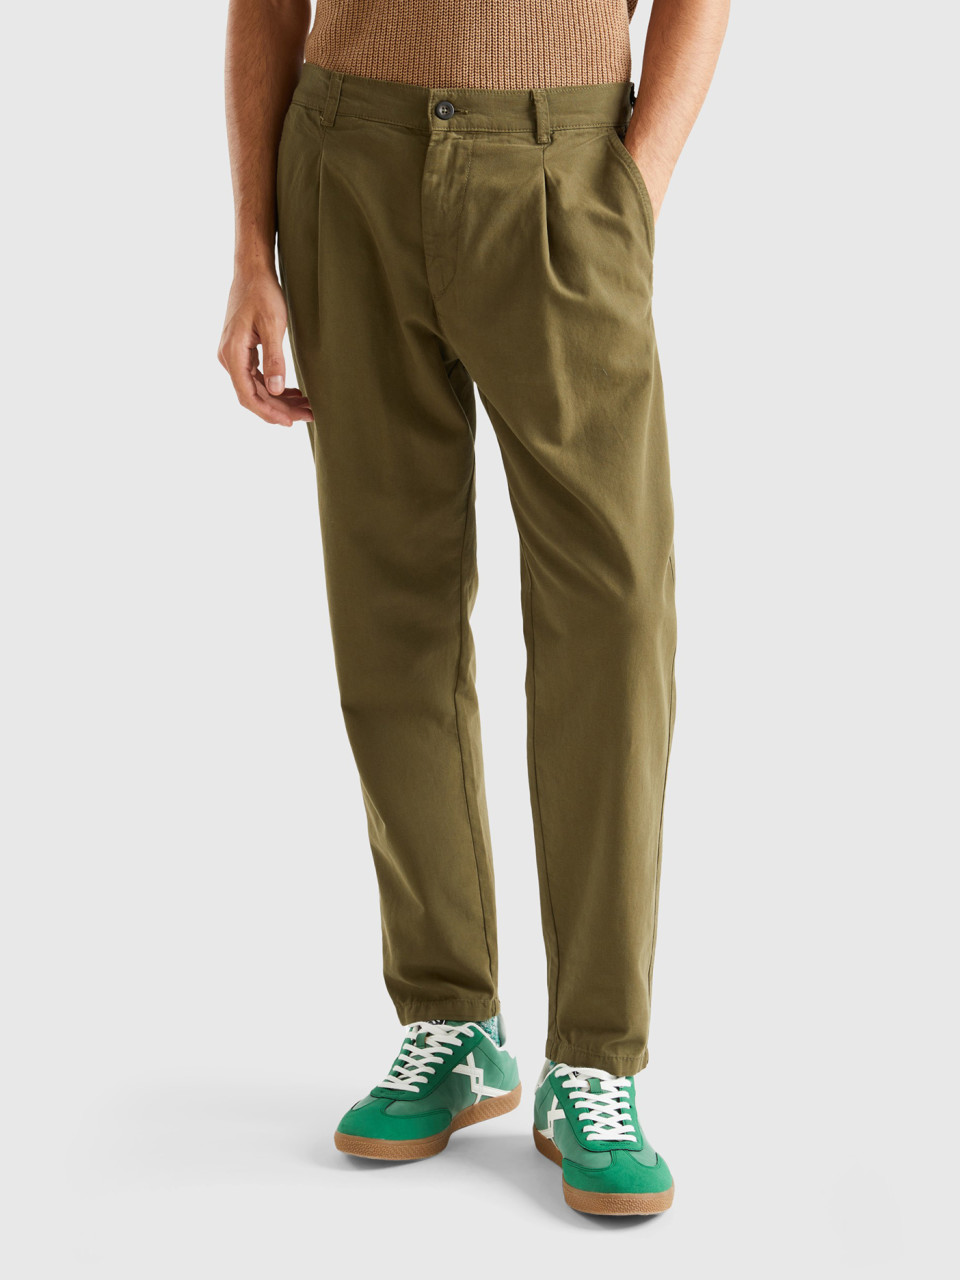 Benetton, Carrot Fit Chinos In Light Cotton, Military Green, Men